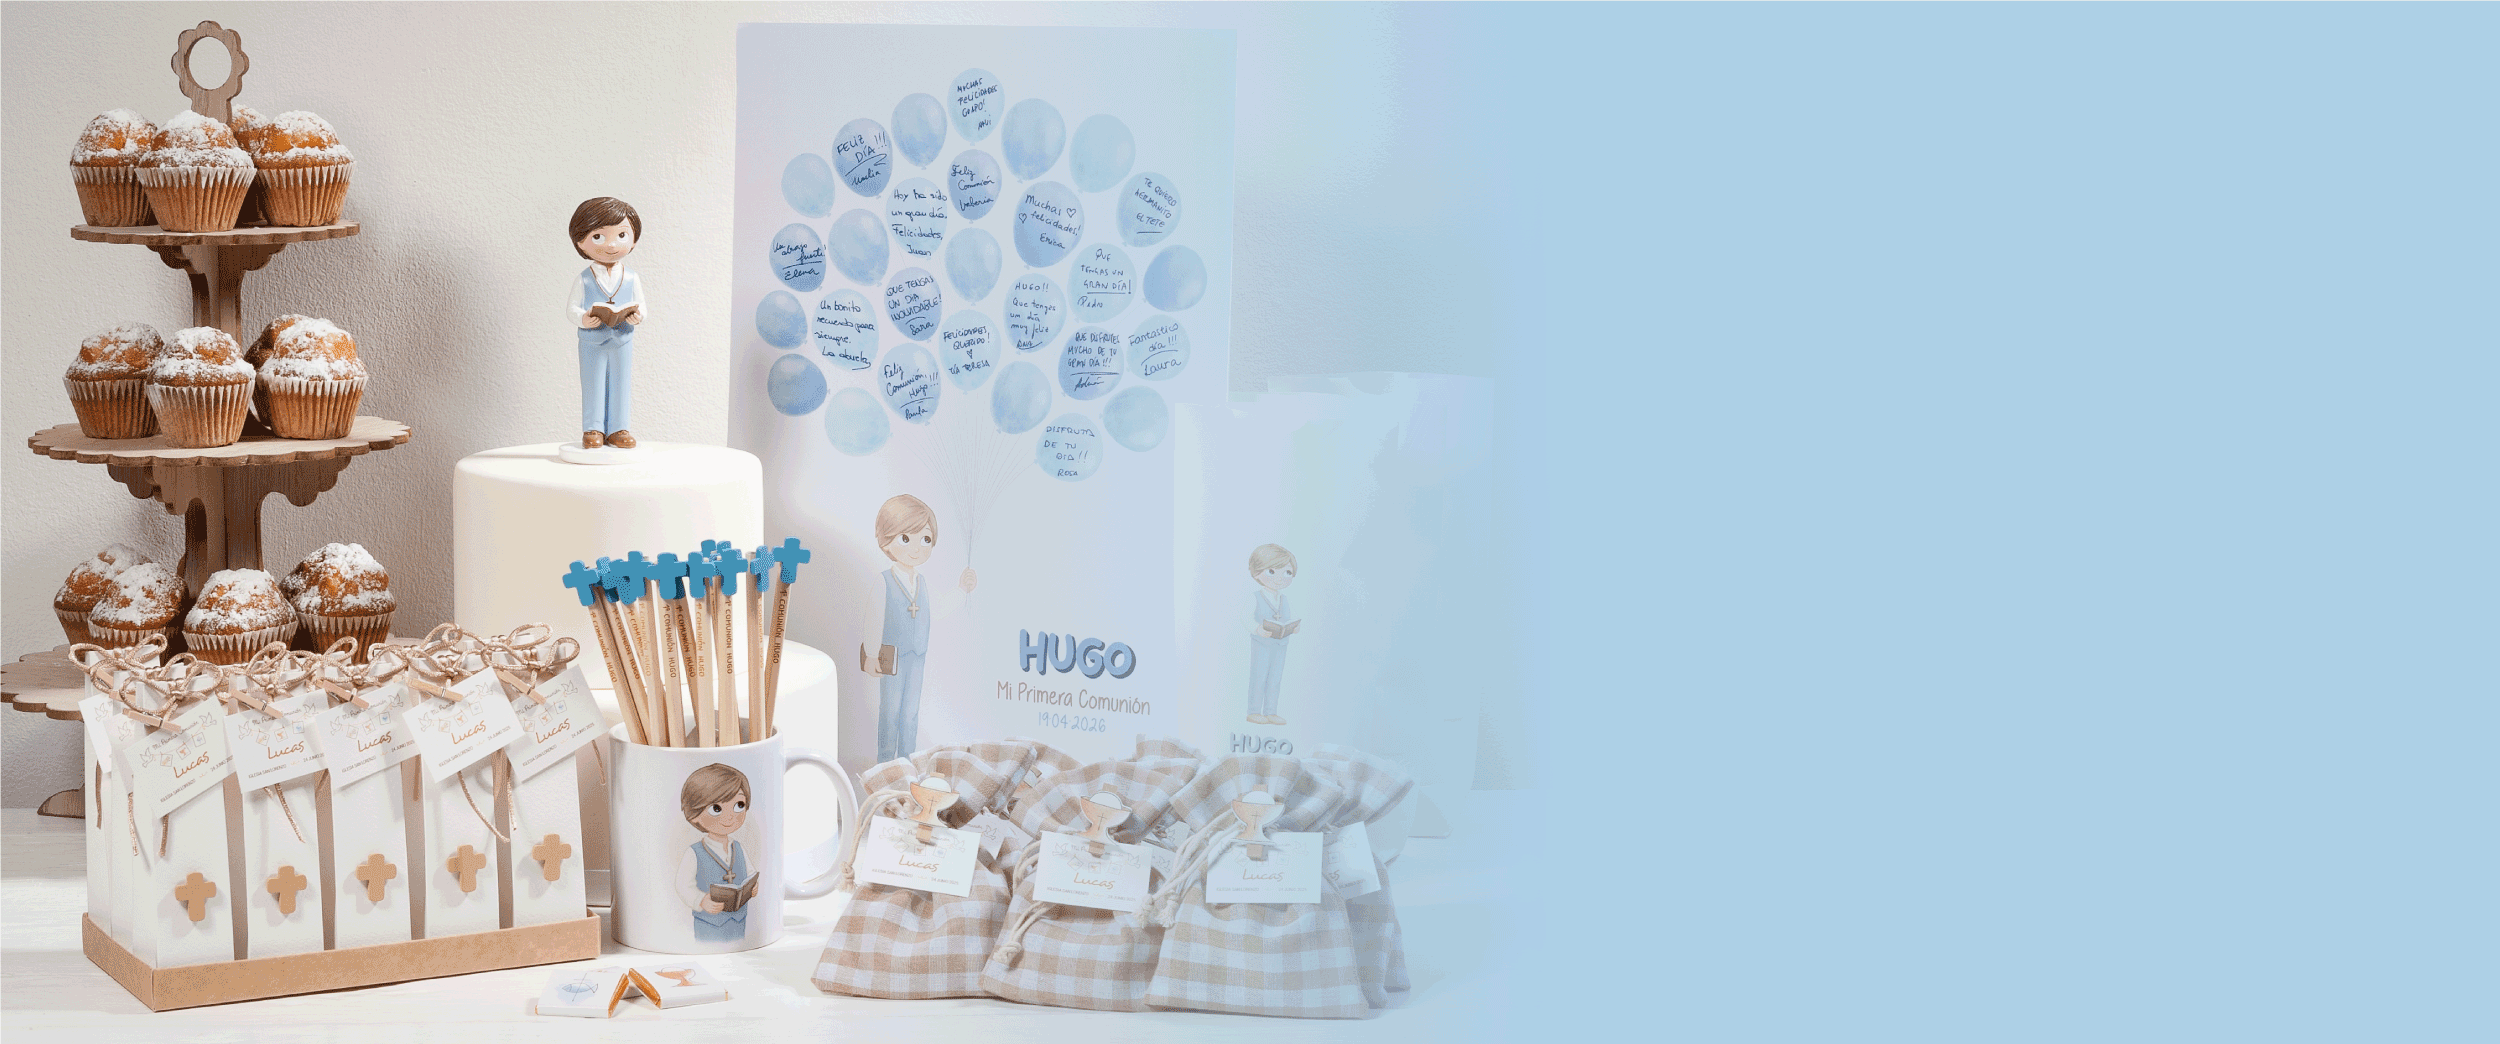 Favors and gifts for the first communion